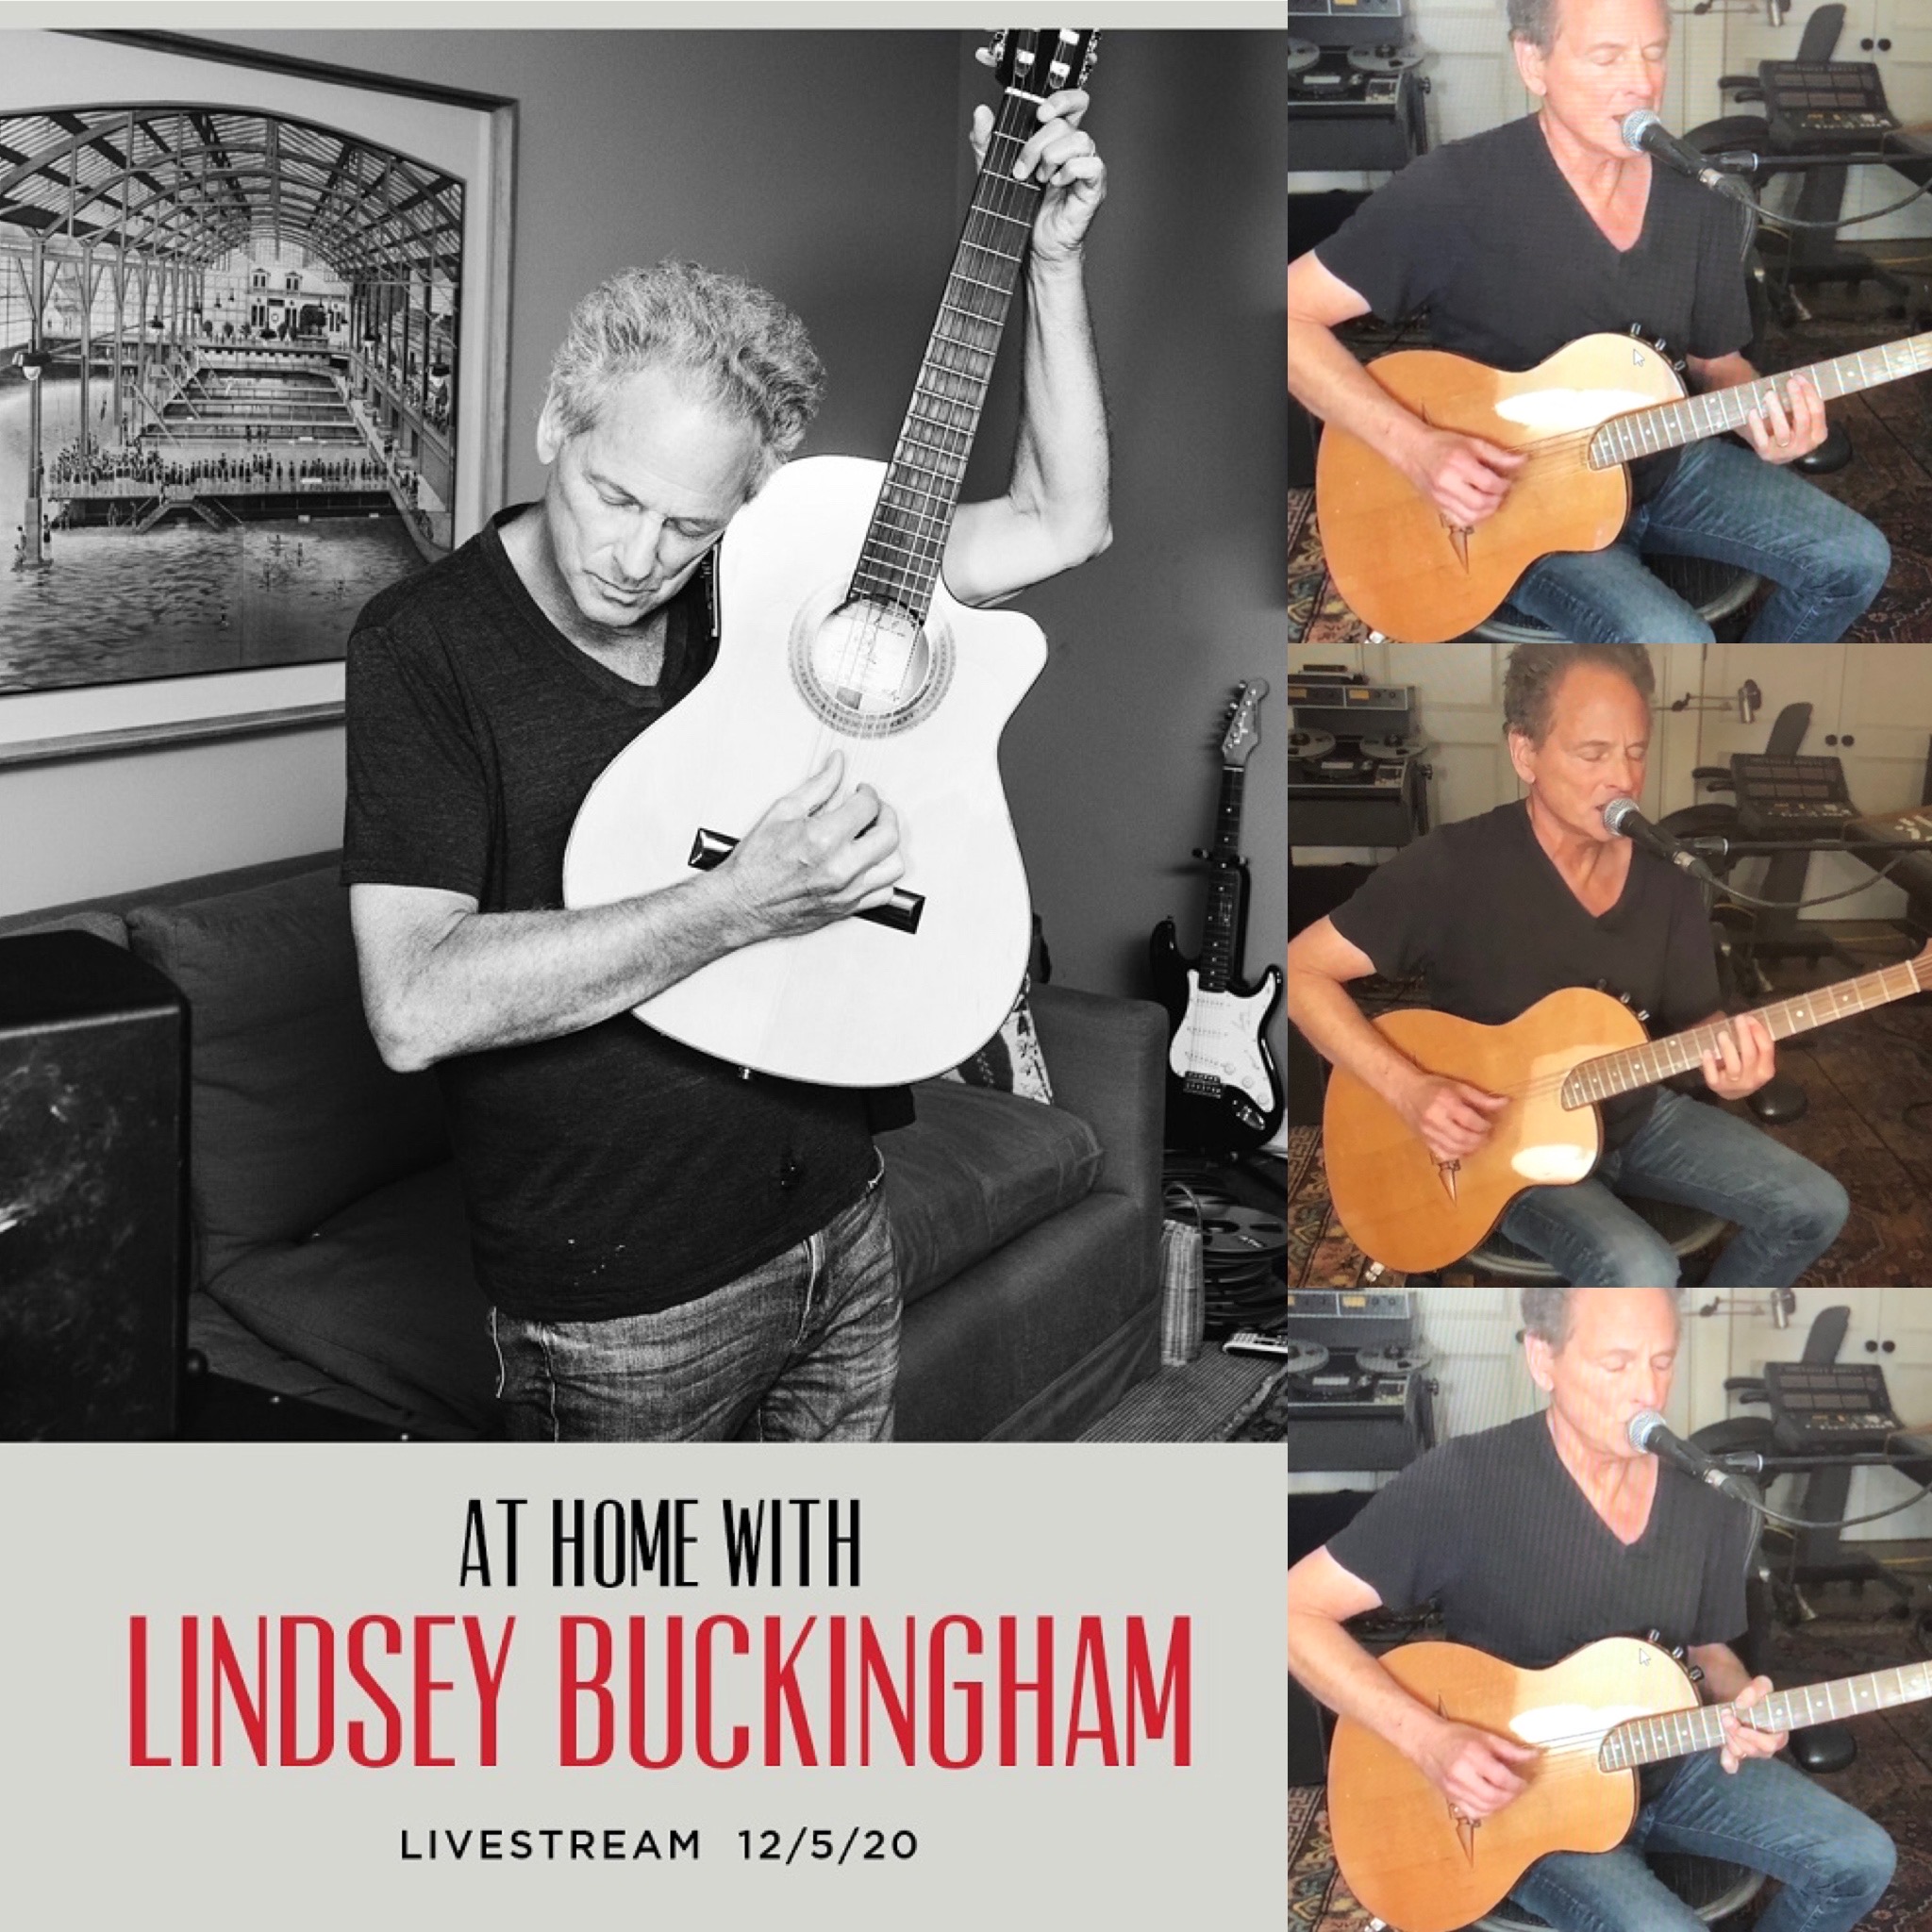 At Home with Lindsey Buckingham - 12/5/20